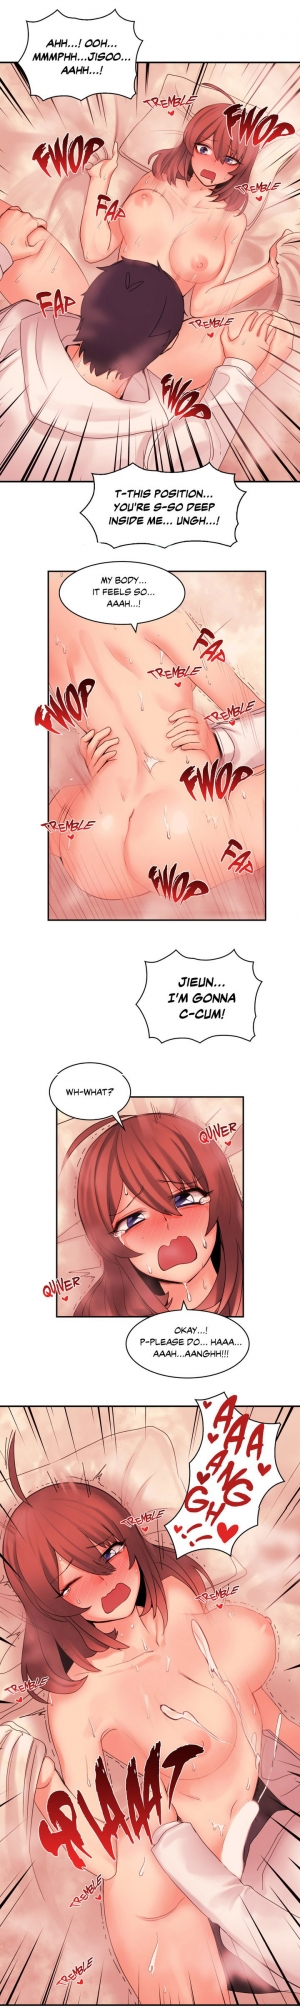 [Gaehoju, Gunnermul] The Girl That Got Stuck in the Wall Ch.11/11 [COMPLETED] [English] [Hentai Universe] - Page 136